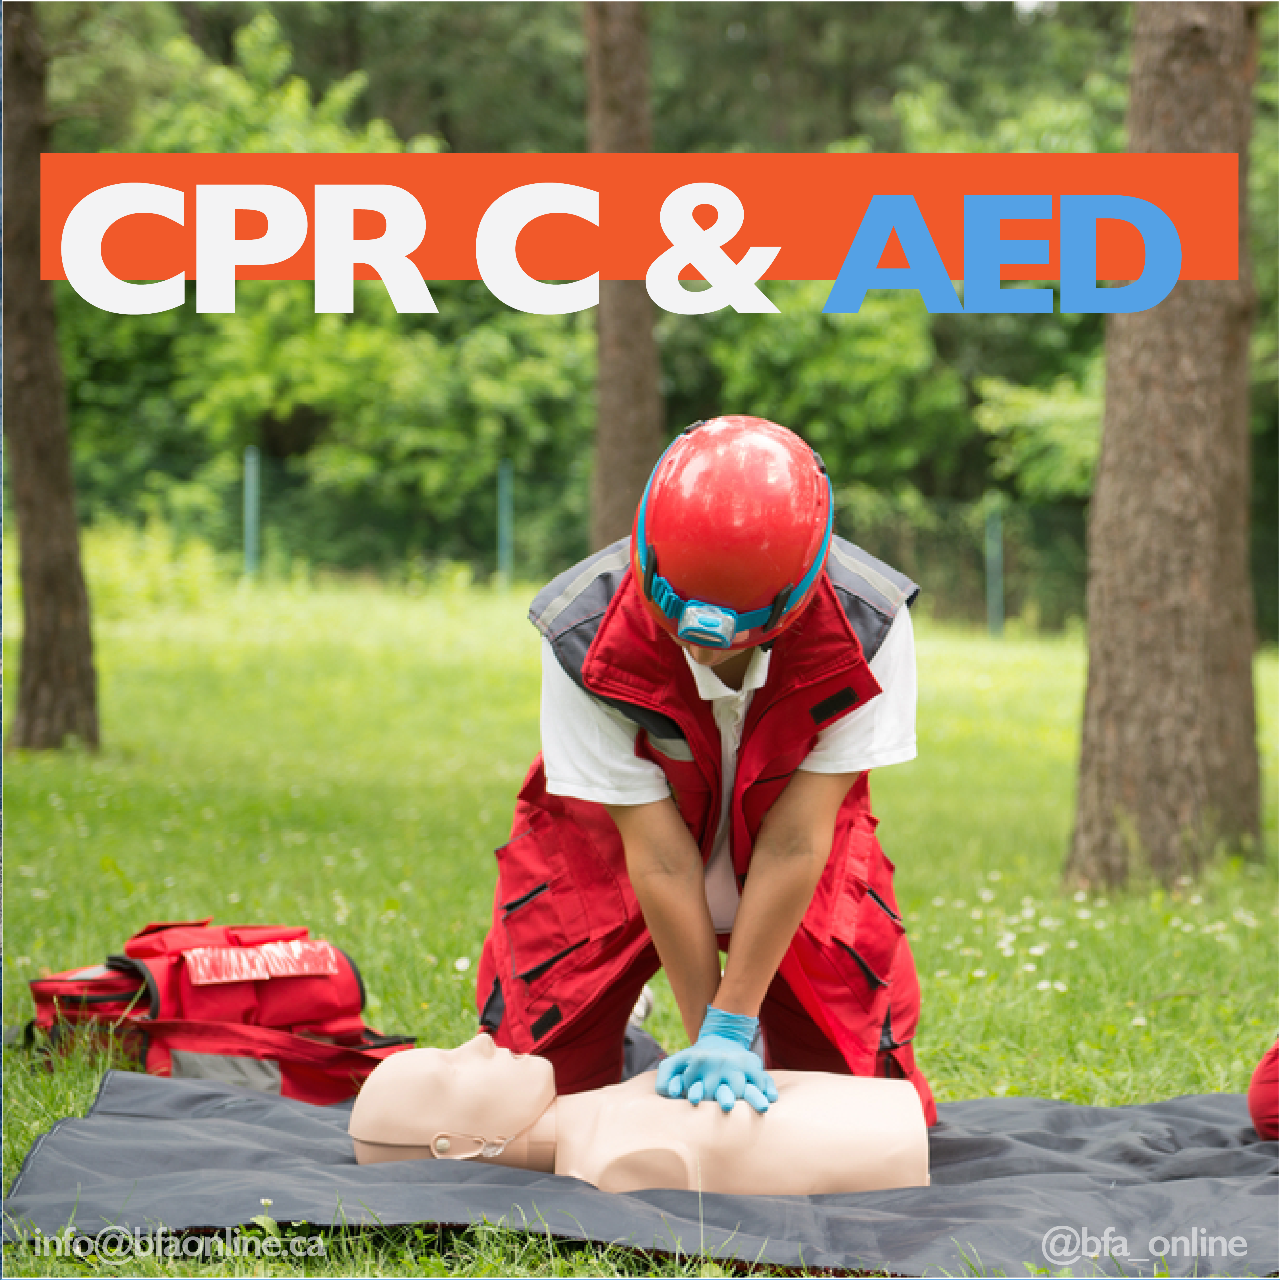 CPR C & AED